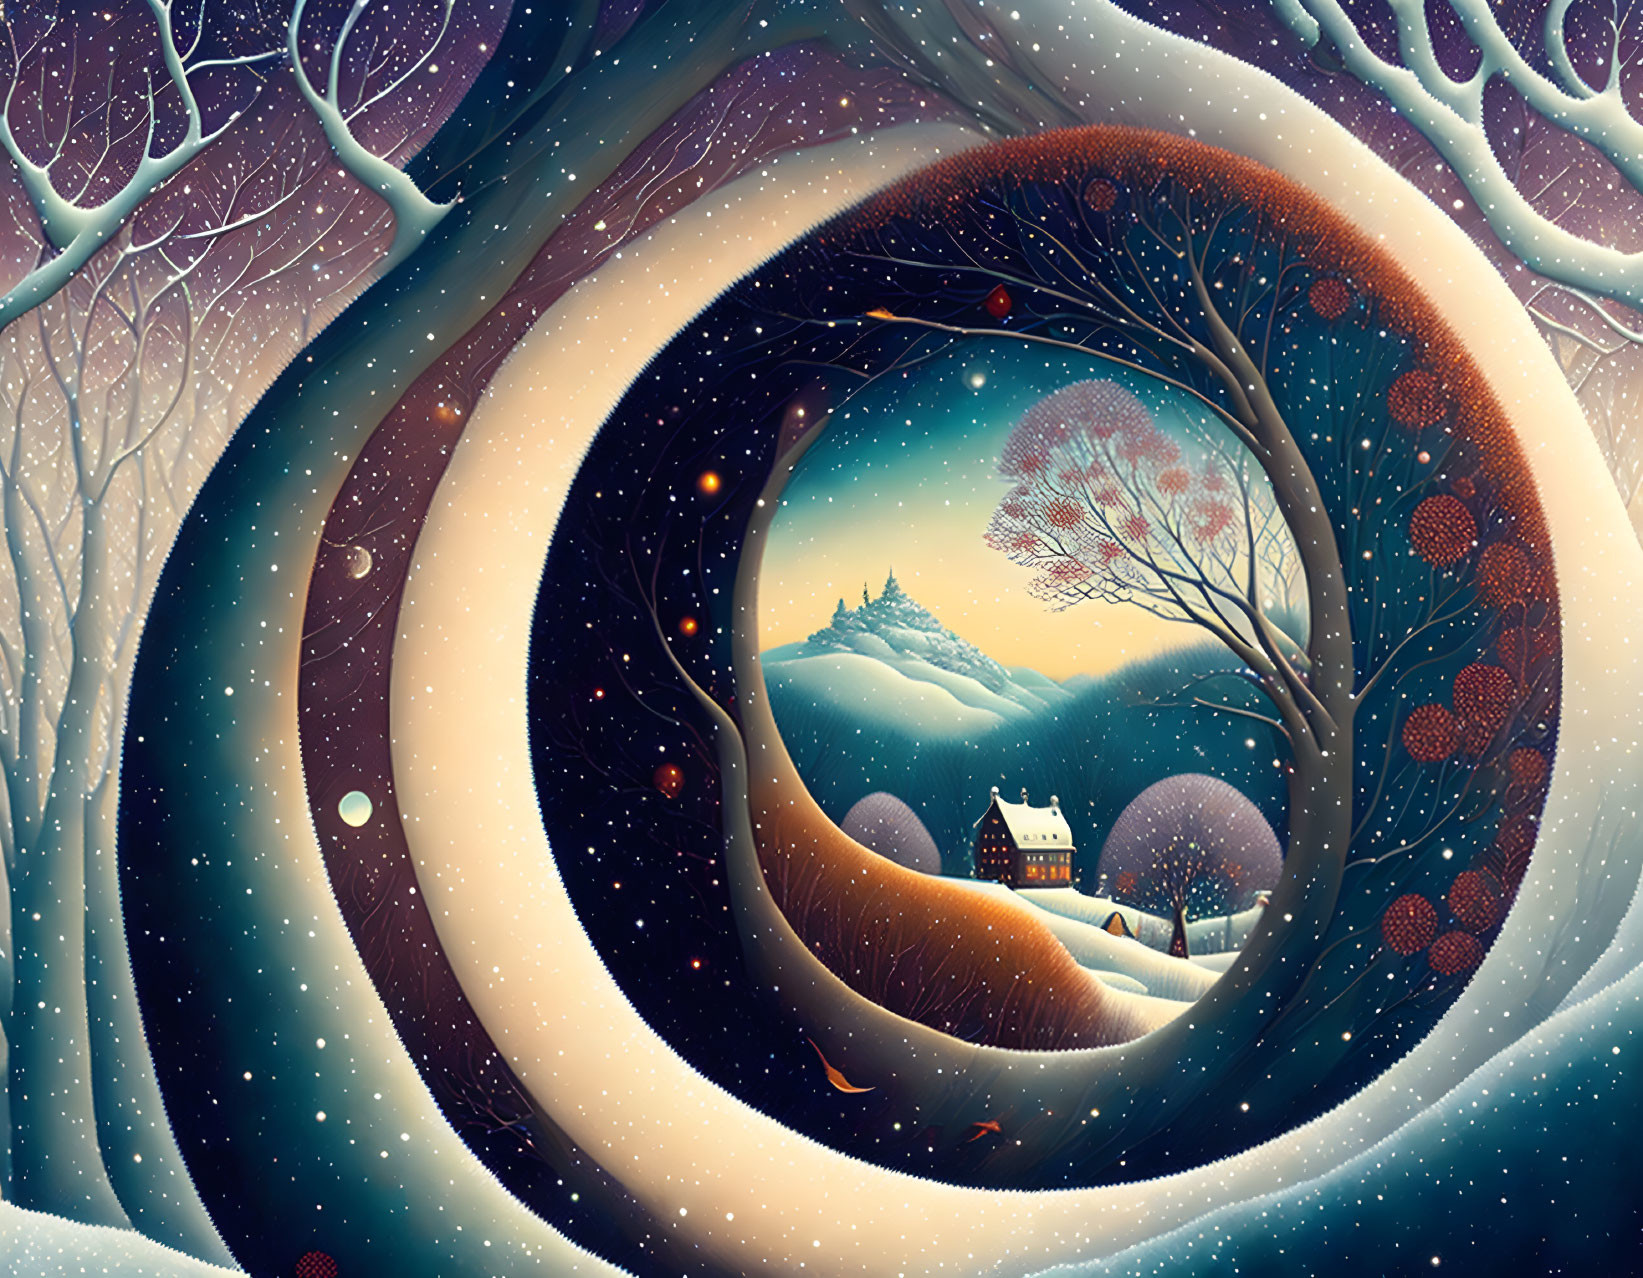 Whimsical winter landscape with village, castle, and swirling skies